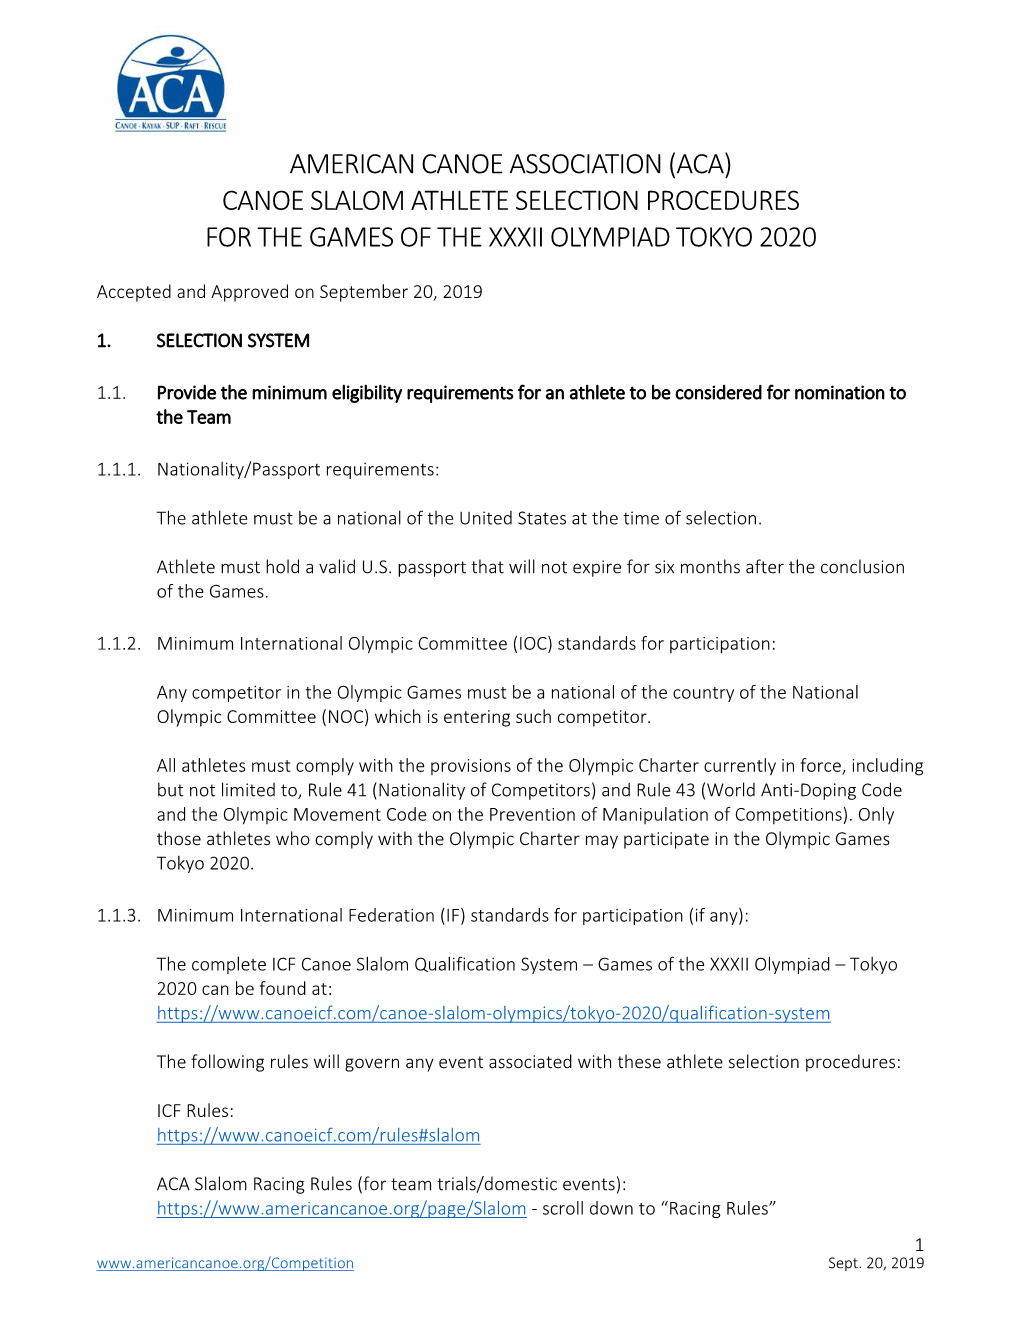 American Canoe Association (Aca) Canoe Slalom Athlete Selection Procedures for the Games of the Xxxii Olympiad Tokyo 2020